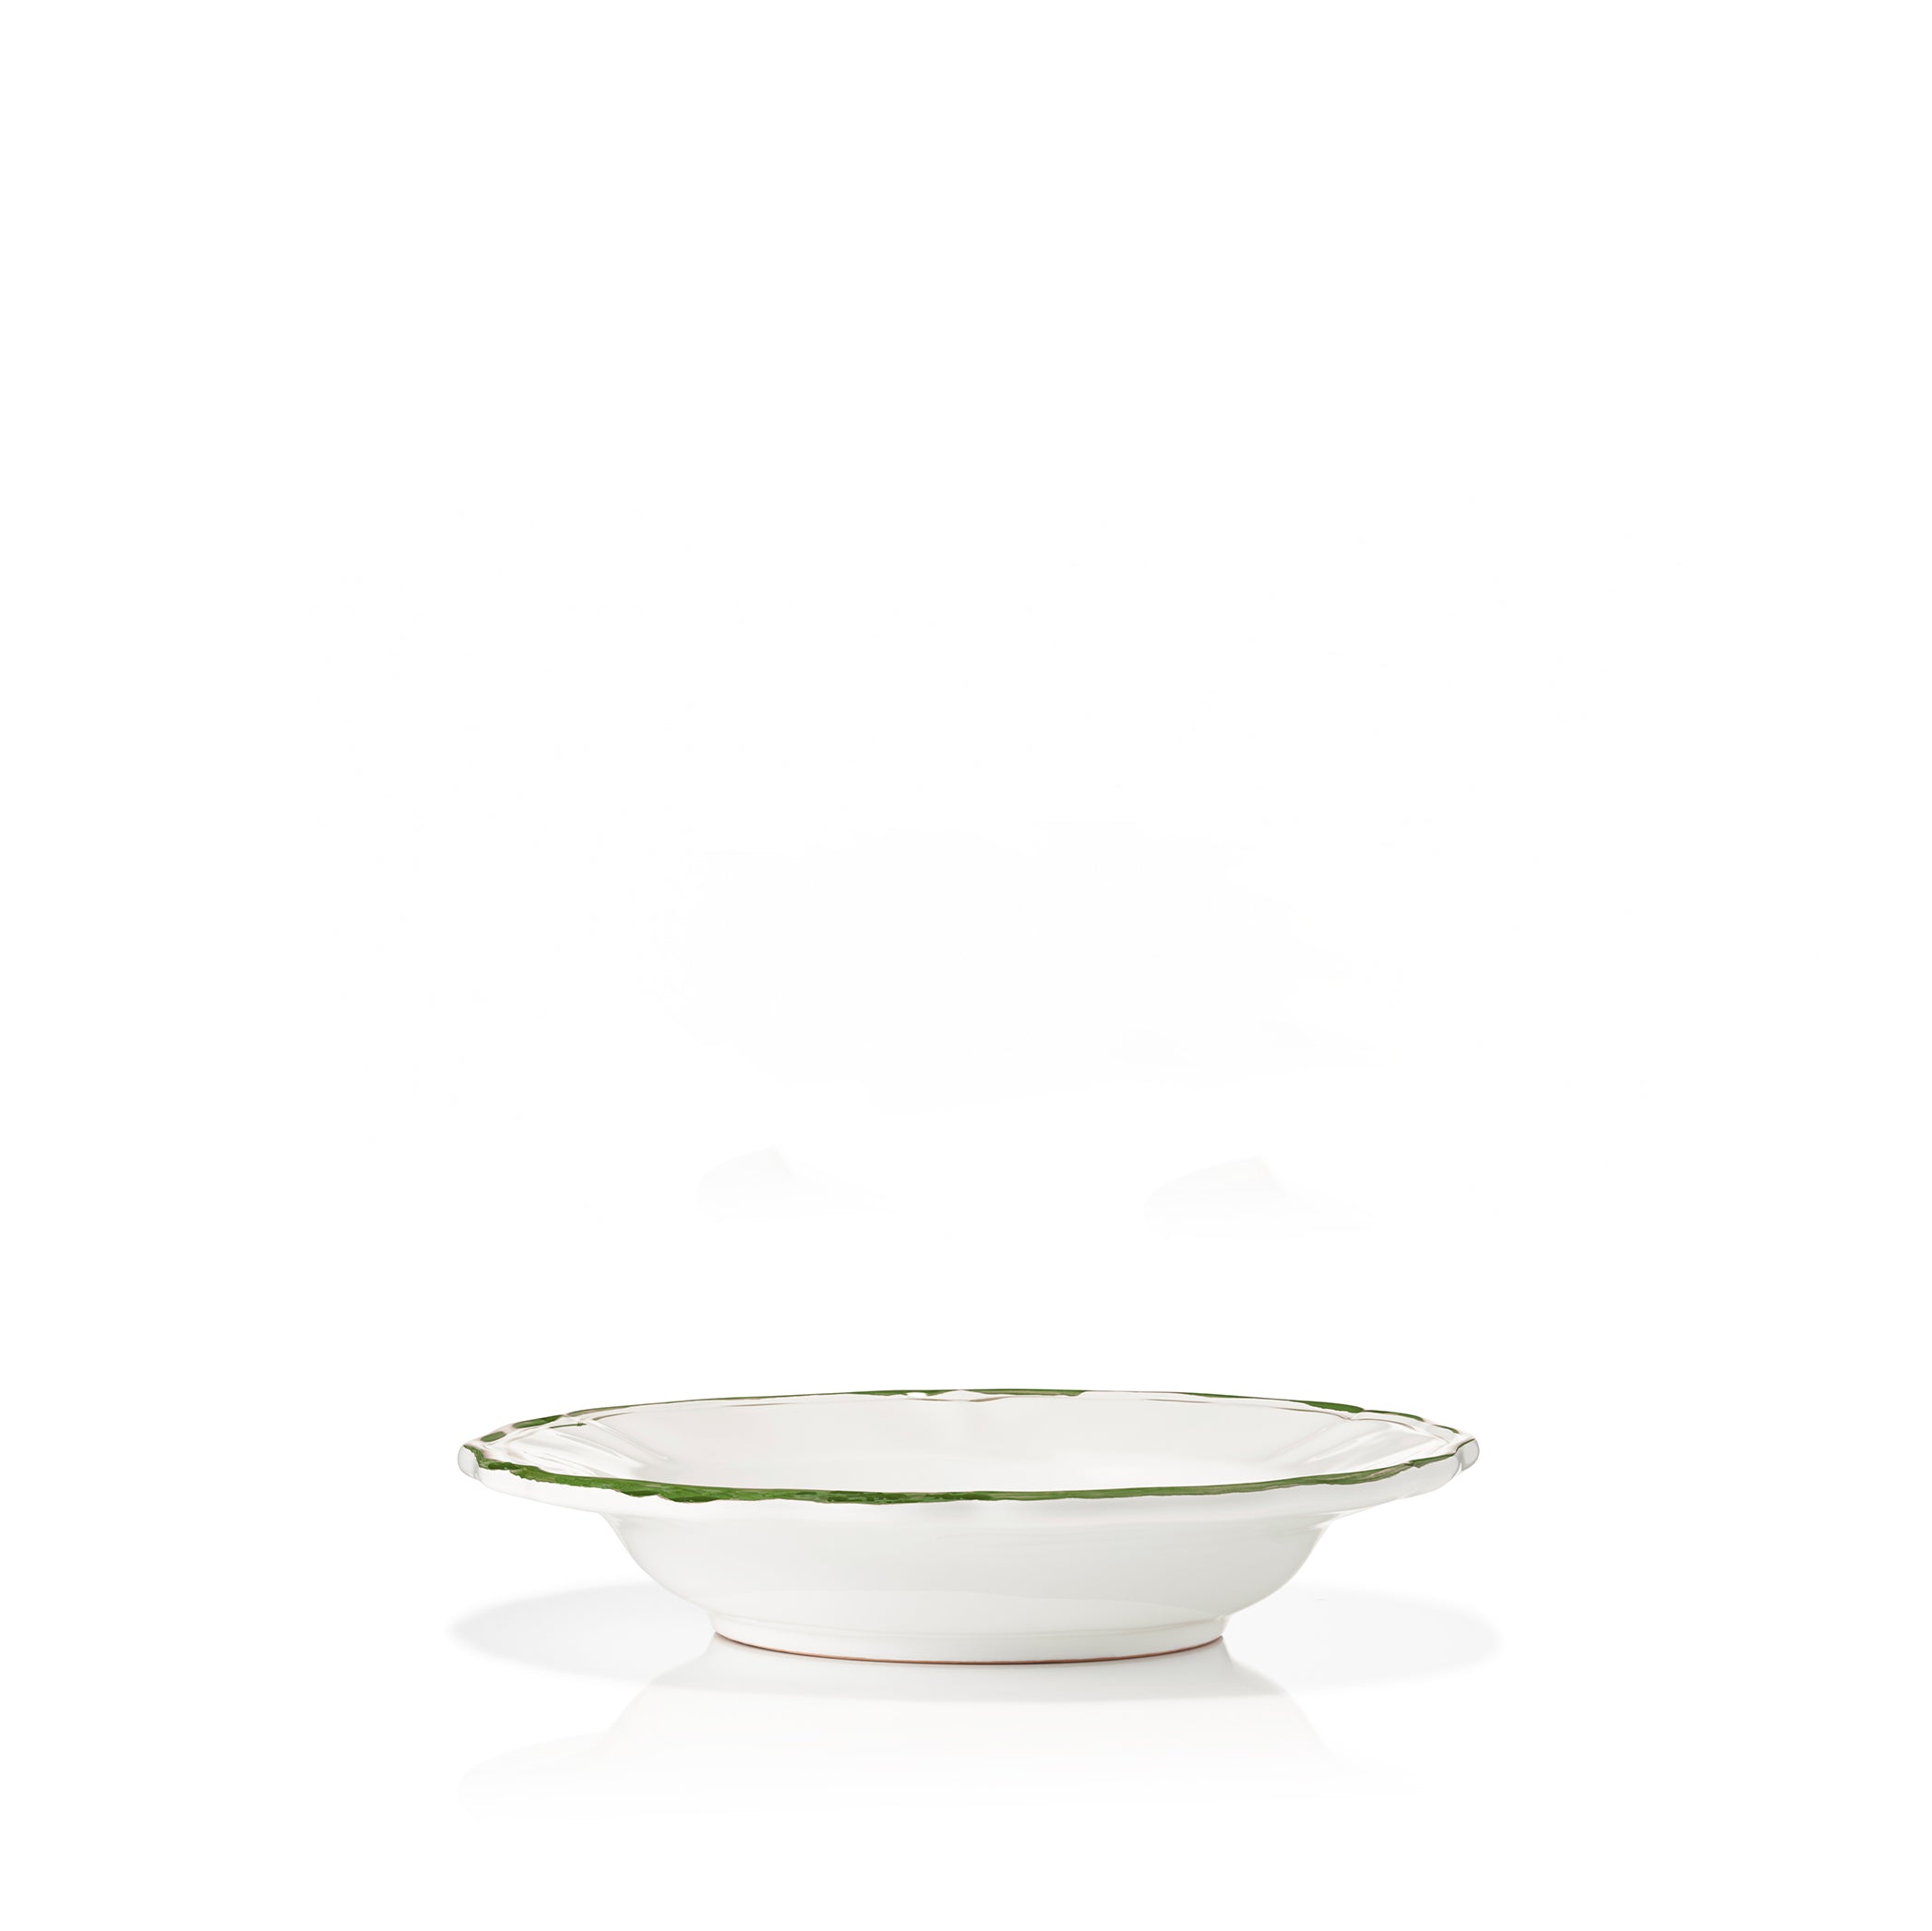 Scalloped Soup Plate With Olive Green Double Rim, 25cm